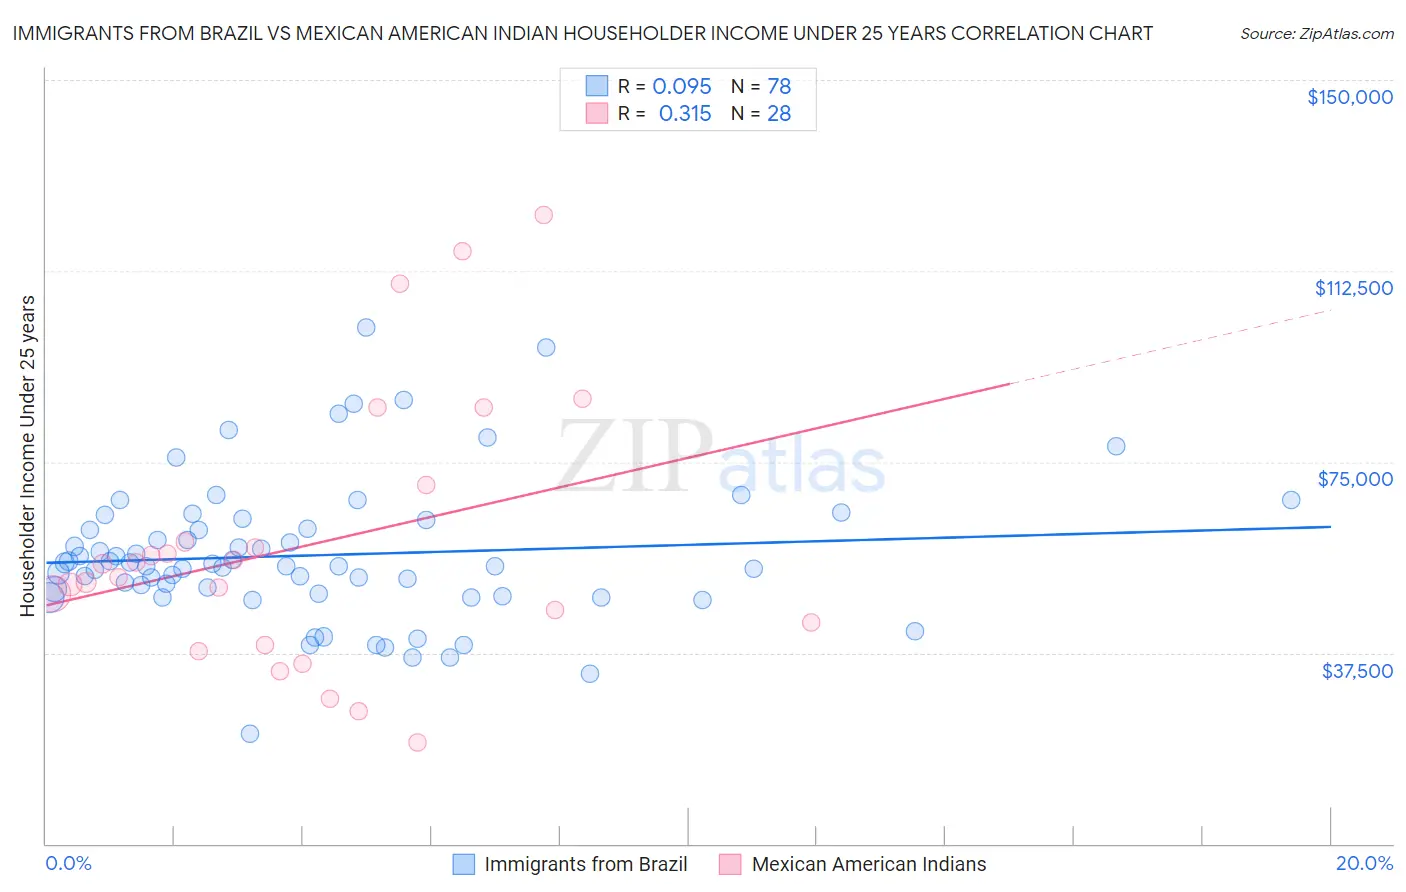 Immigrants from Brazil vs Mexican American Indian Householder Income Under 25 years